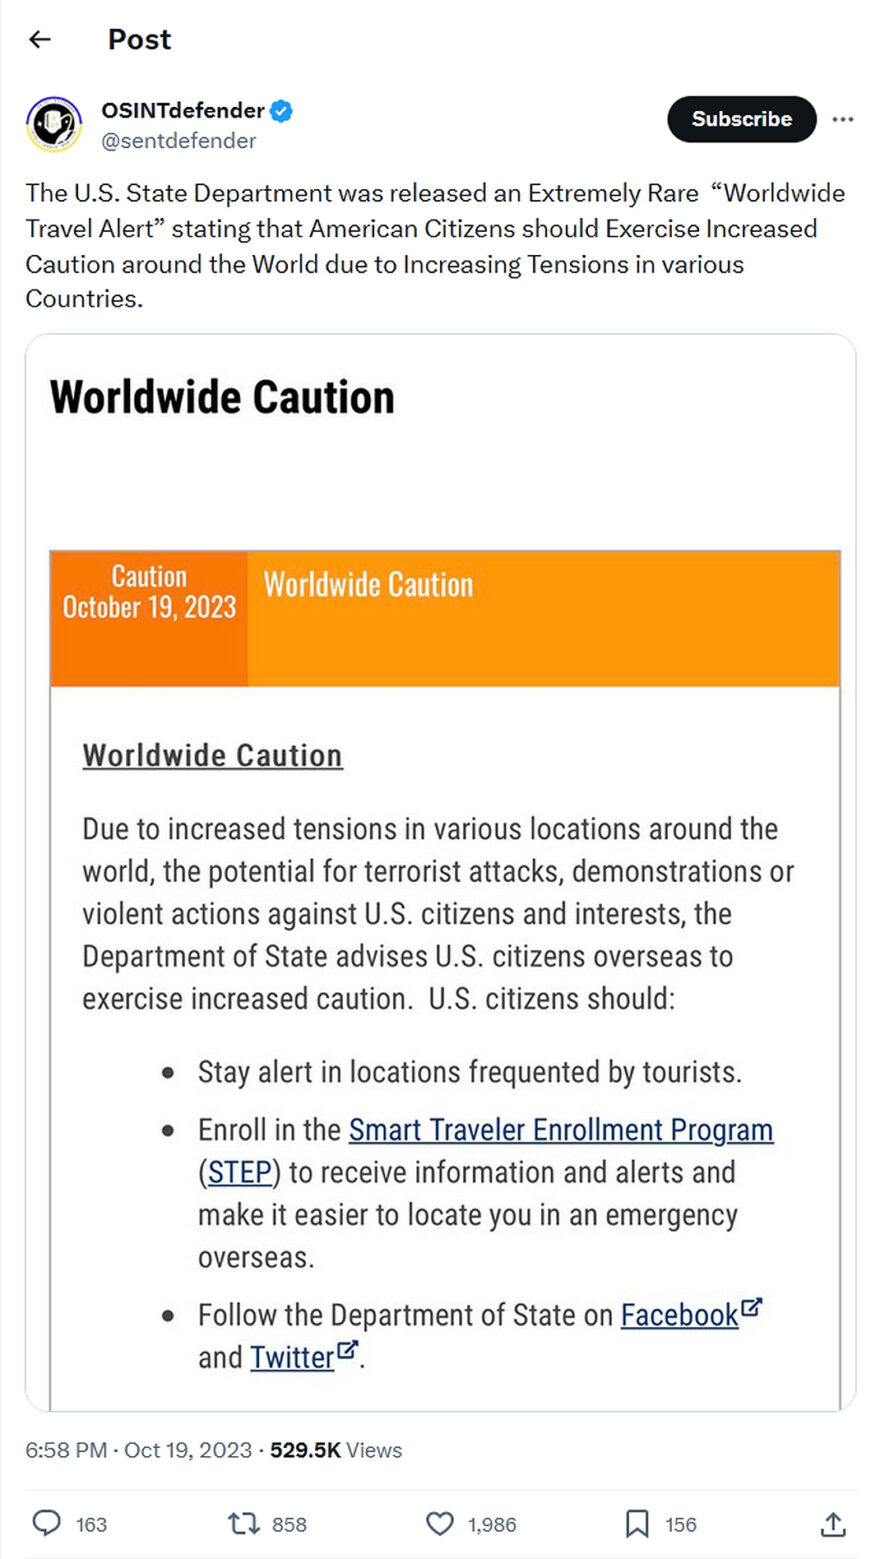 OSINTdefender-tweet-19October2023-The U.S. State Department was released an Extremely Rare “Worldwide Travel Alert” stating that American Citizens should Exercise Increased Caution around the World due to Increasing Tensions in various Countries.